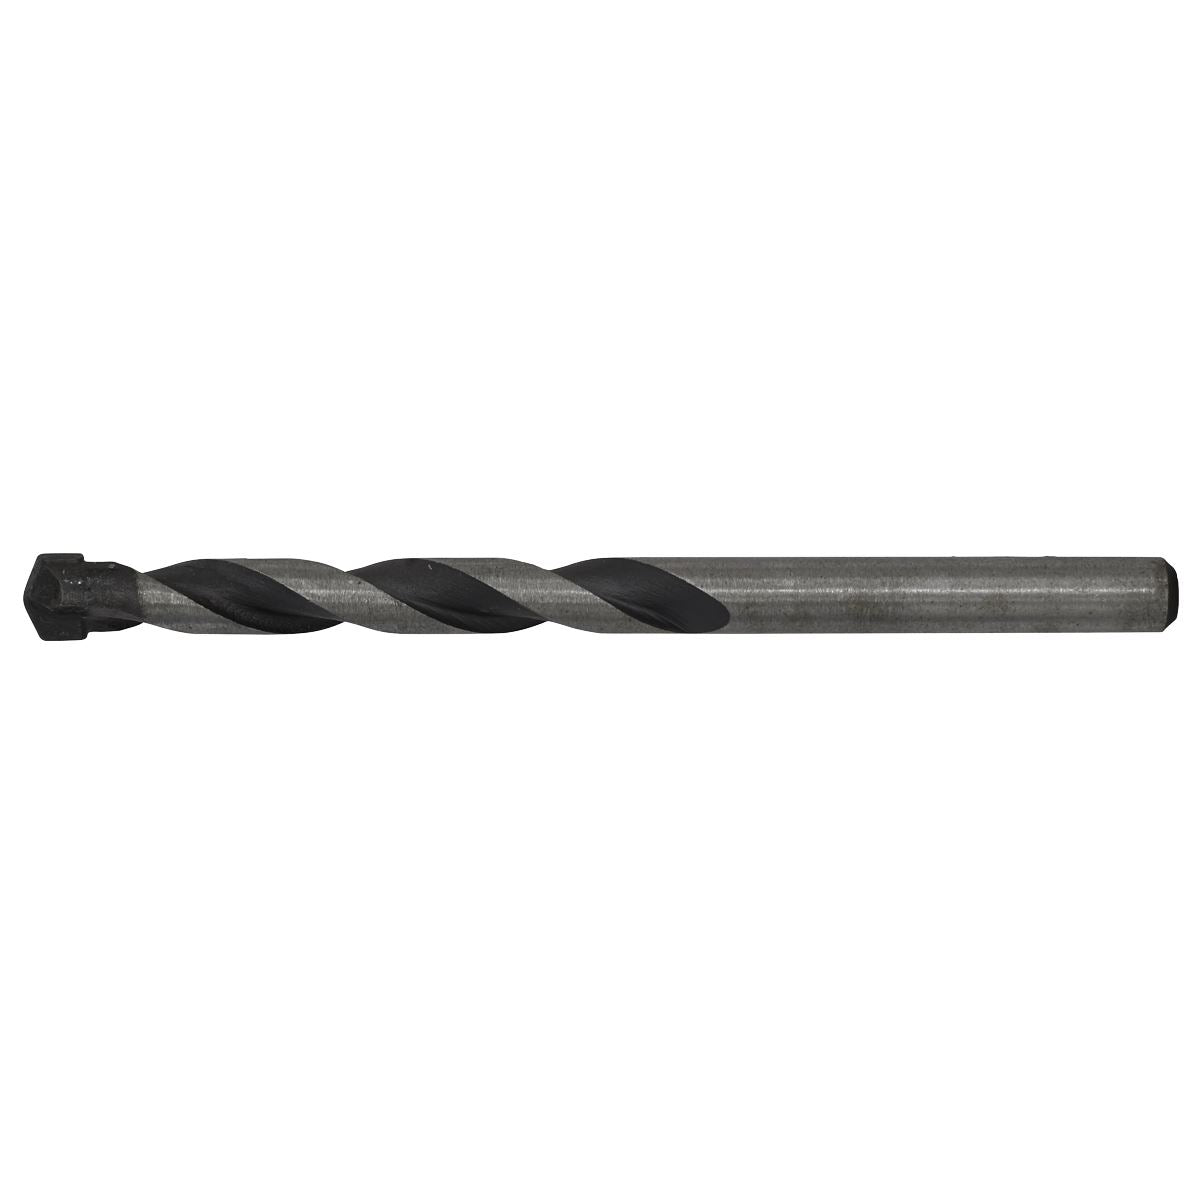 Worksafe by Sealey Straight Shank Rotary Impact Drill Bit Ø8 x 120mm